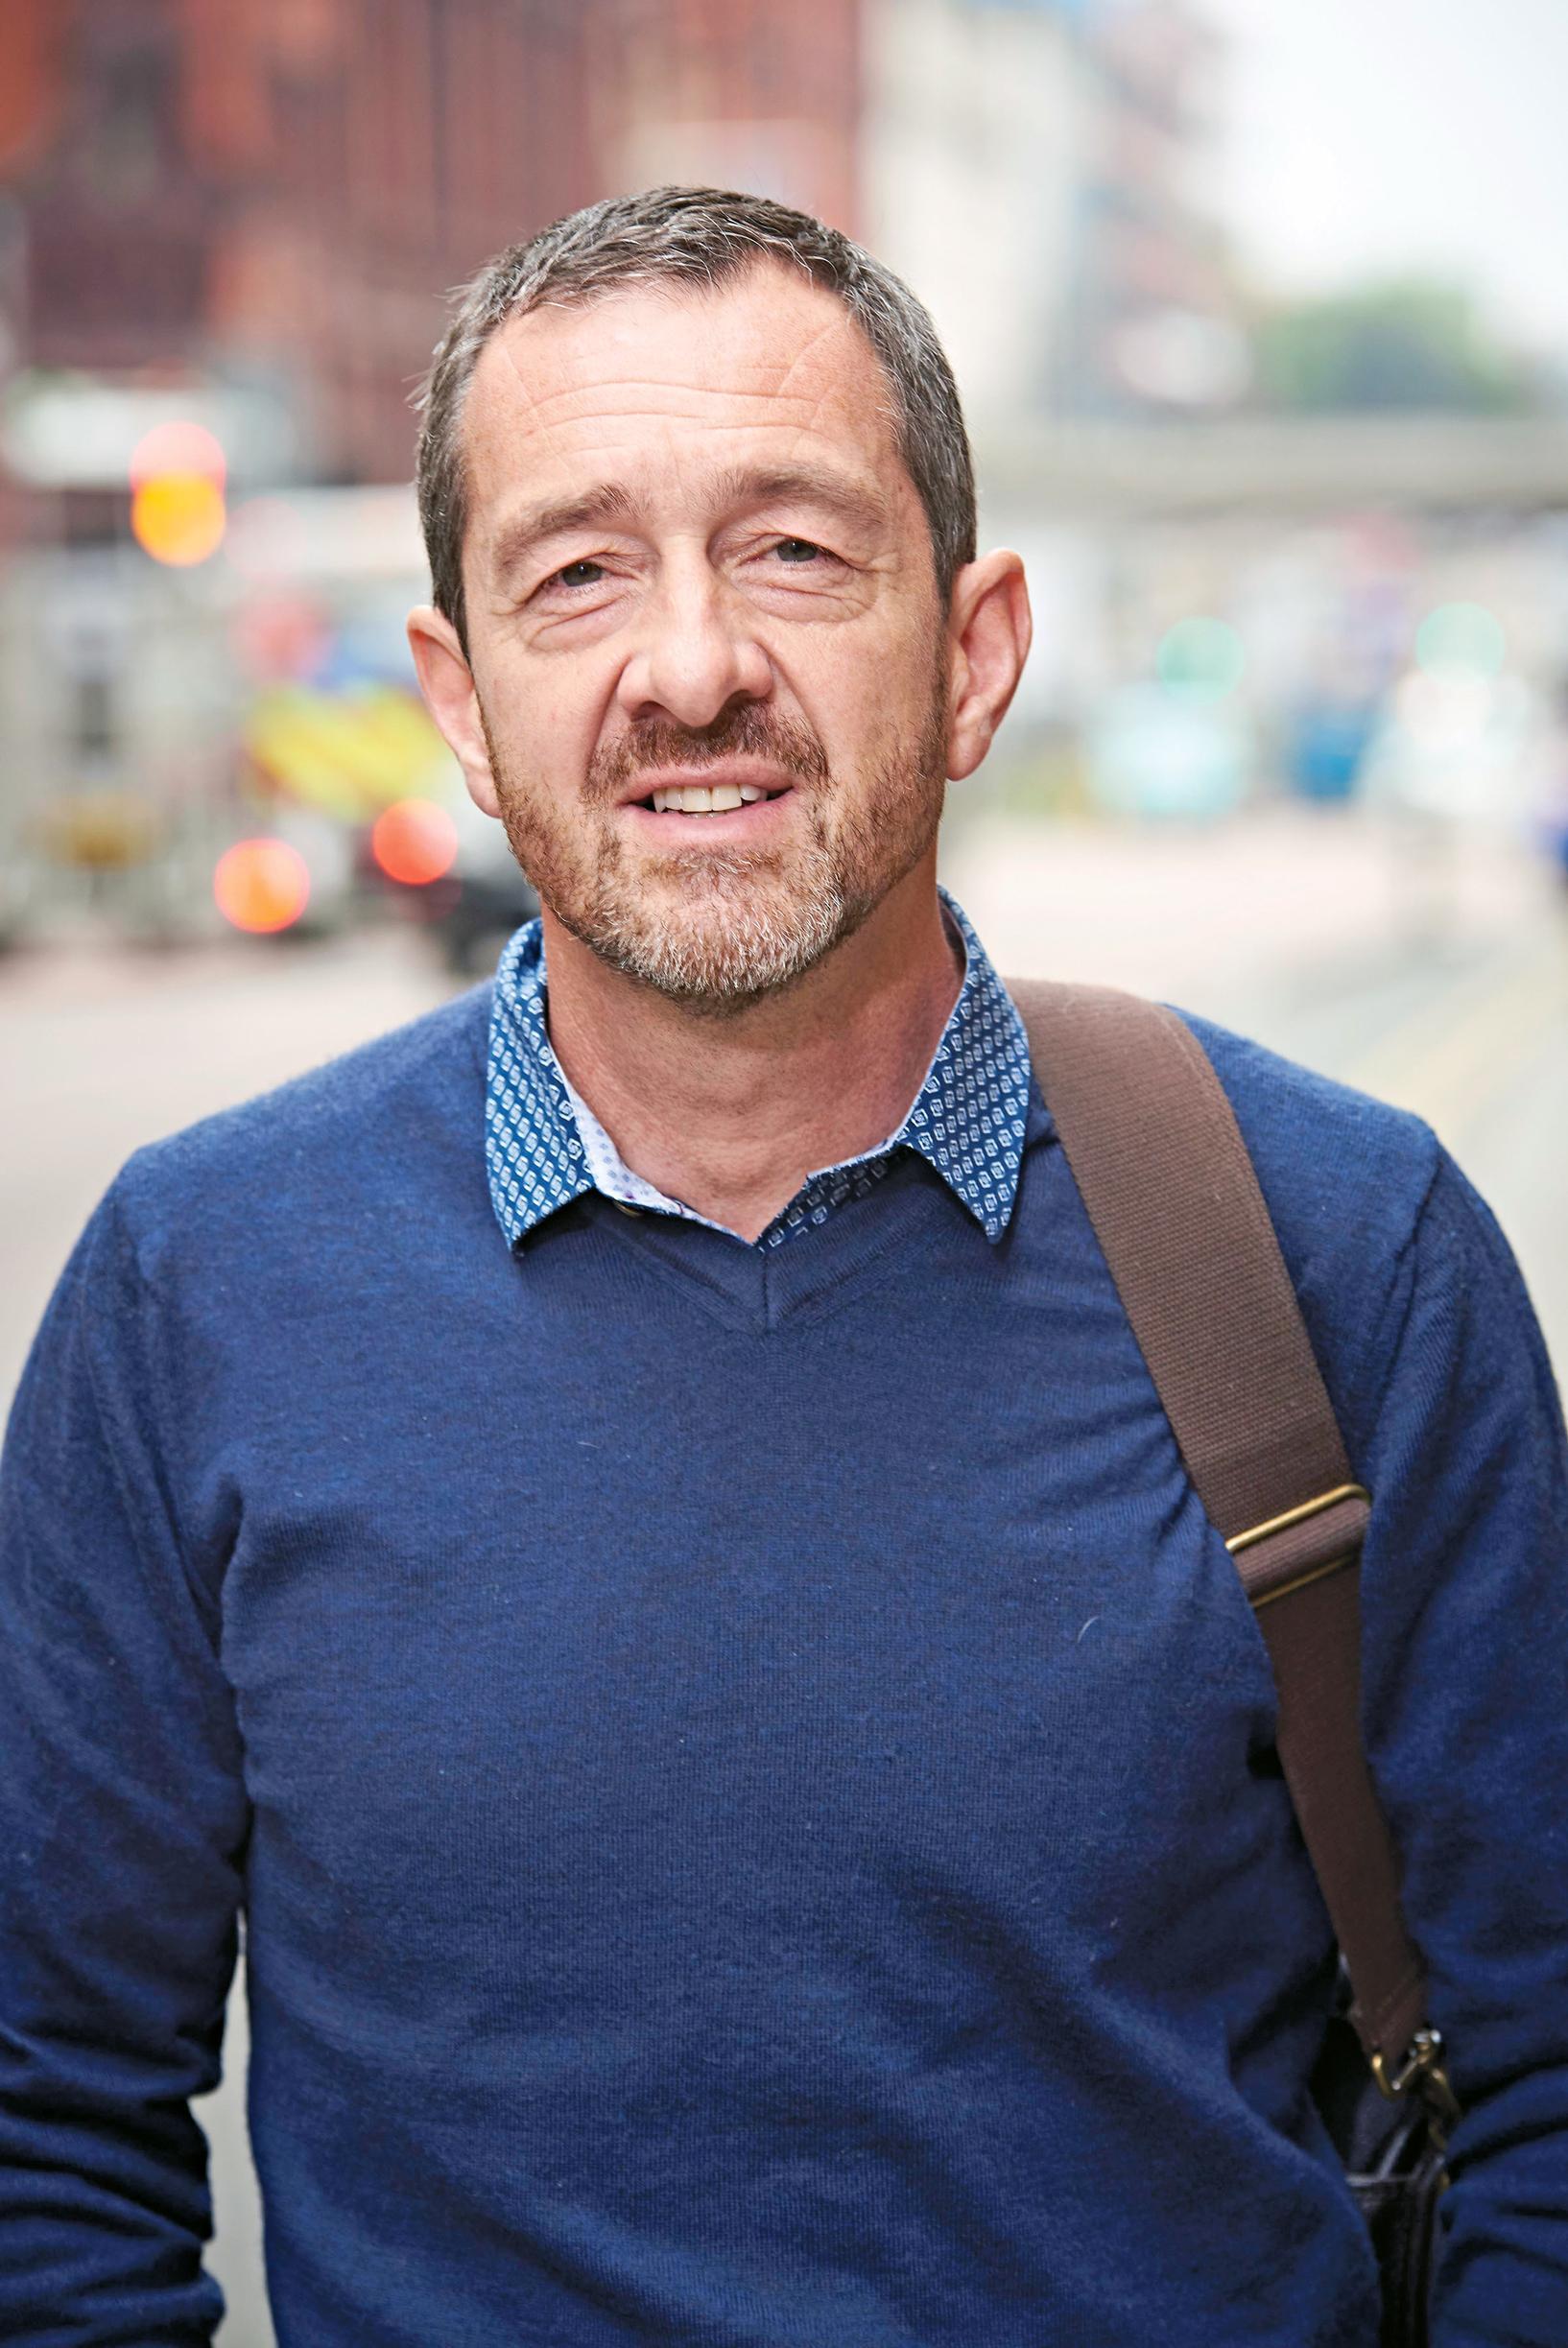 Boardman takes lead role at Active Travel England